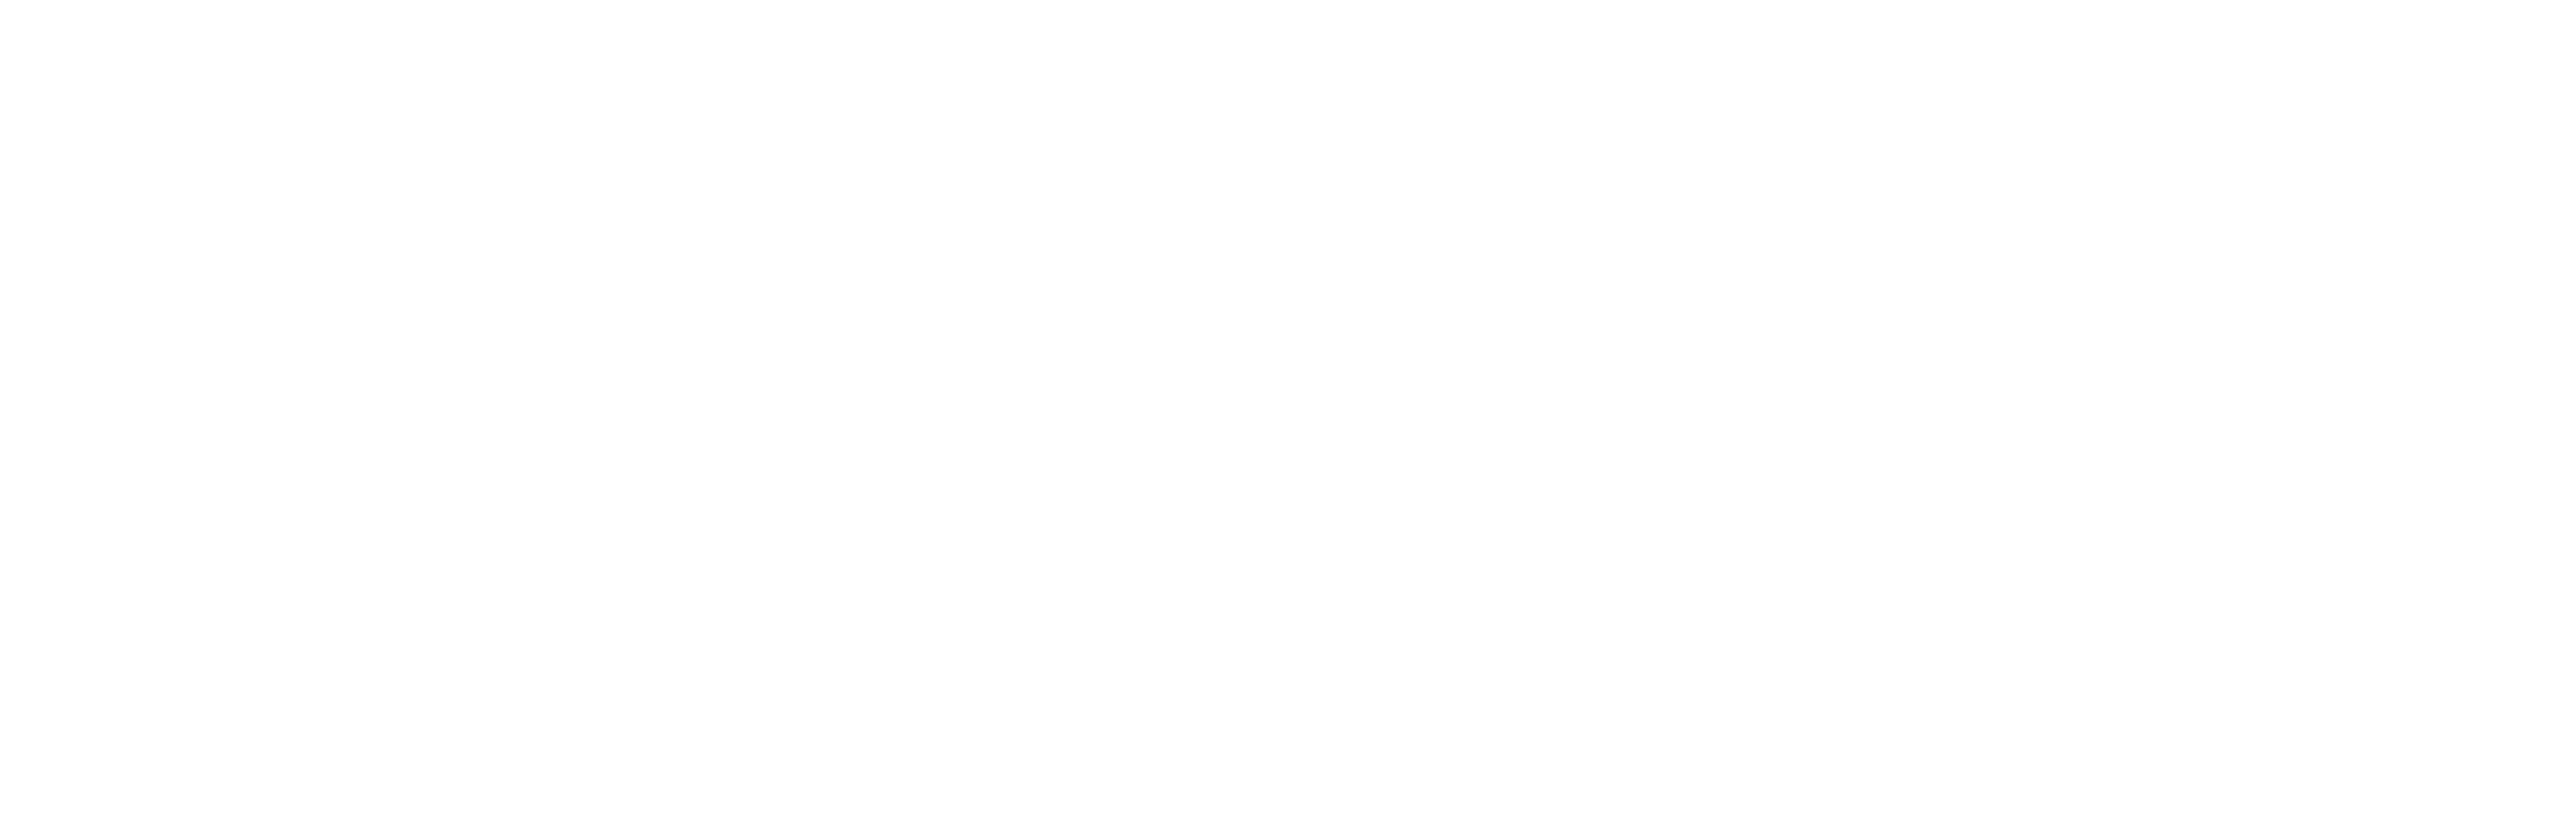 Connecting AI innovators with problem owners to identify breakthroughs to solve global challenges